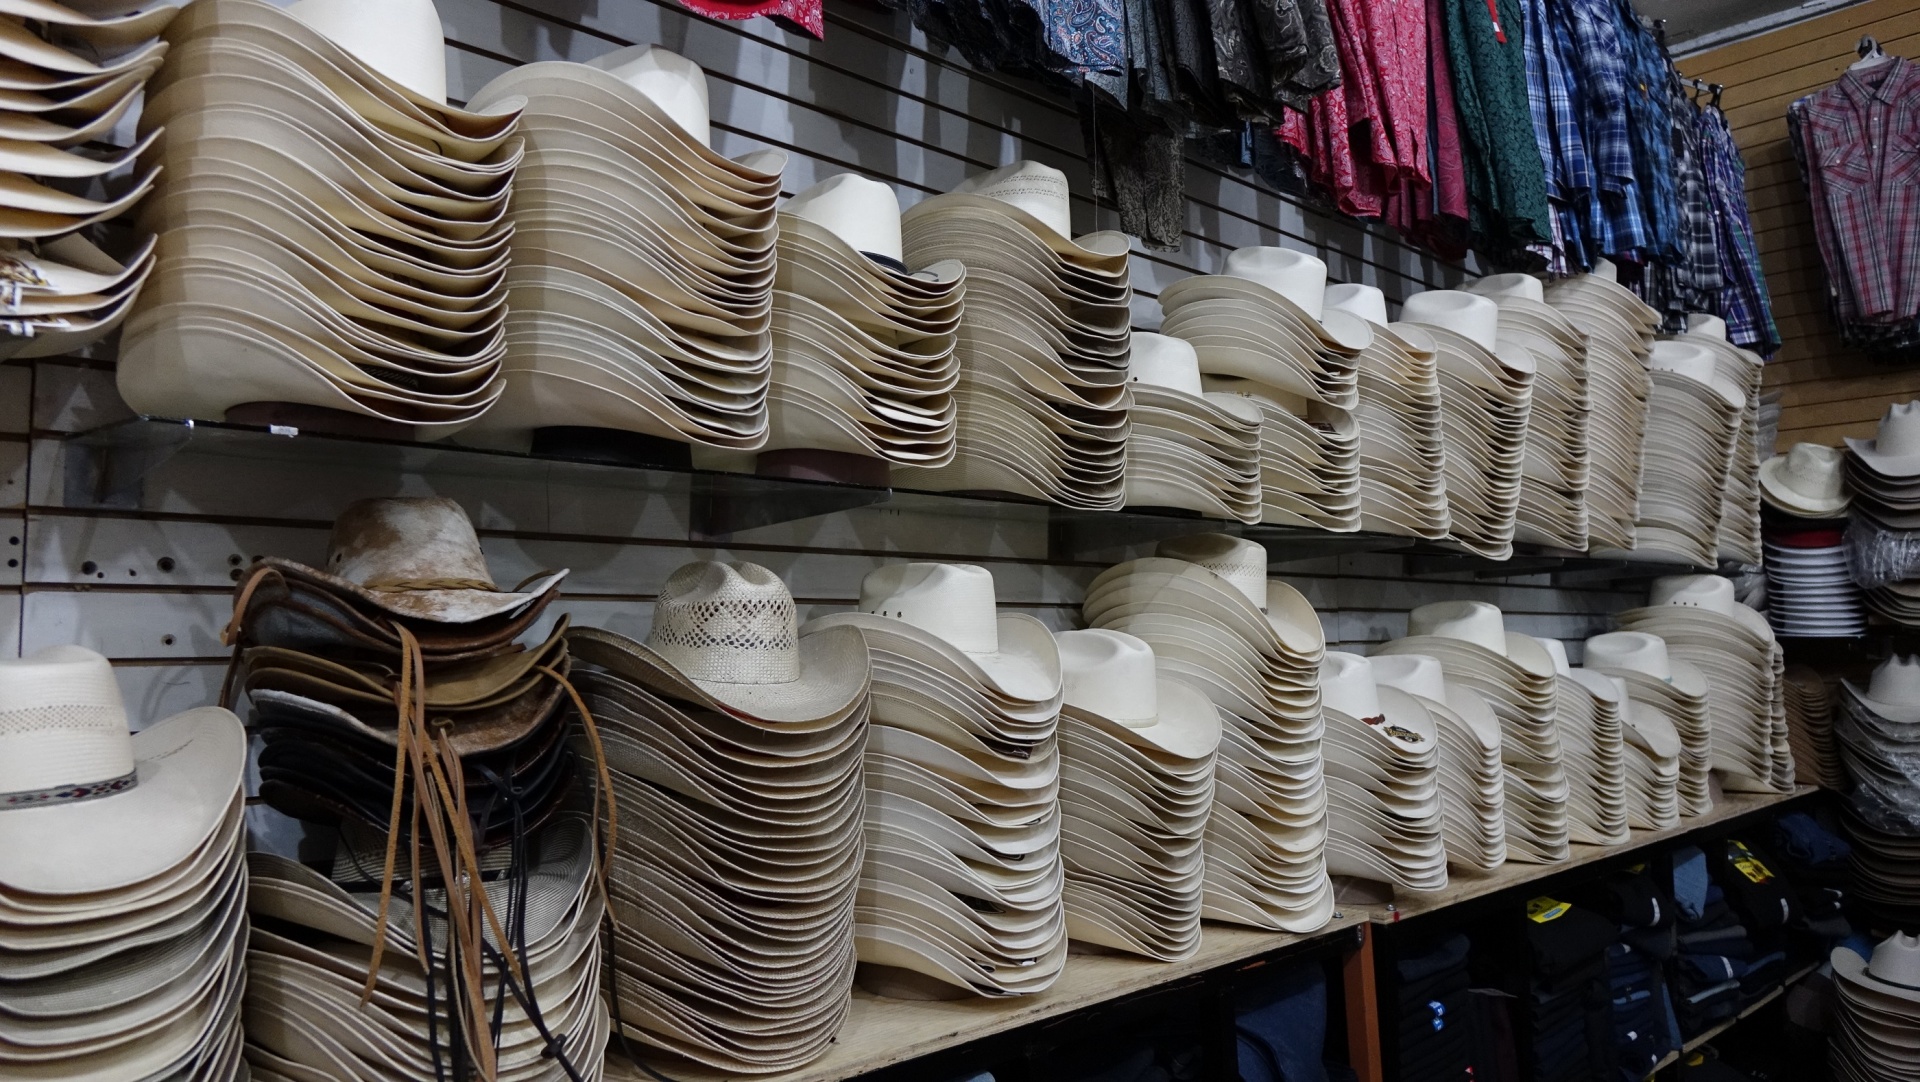 Cowboy Hats in a Retail Store on the Shelf